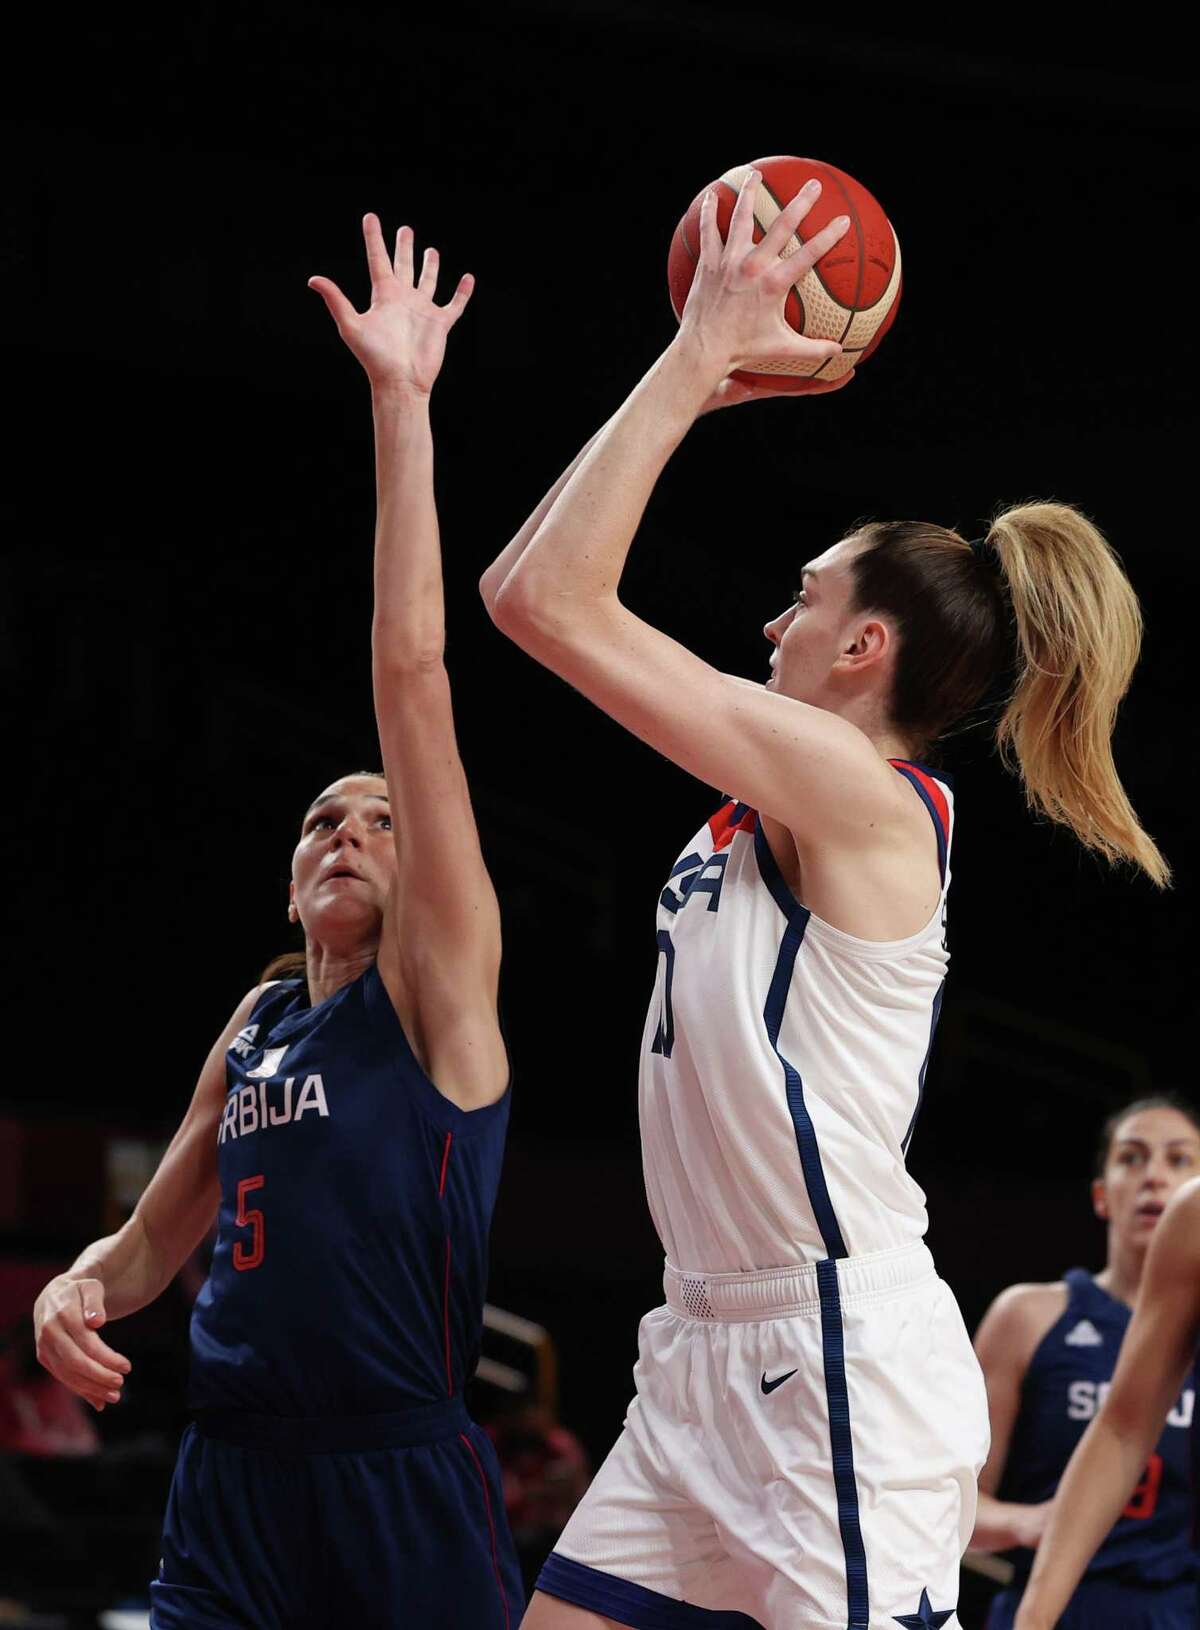 SAITAMA, JAPAN - AUGUST 06: Breanna Stewart #10 of Team United States shoots against Sonja Vasic #5 of Team Serbia during the second half of a Women's Basketball Semifinals game on day fourteen of the Tokyo 2020 Olympic Games at Saitama Super Arena on August 06, 2021 in Saitama, Japan. (Photo by Kevin C. Cox/Getty Images)